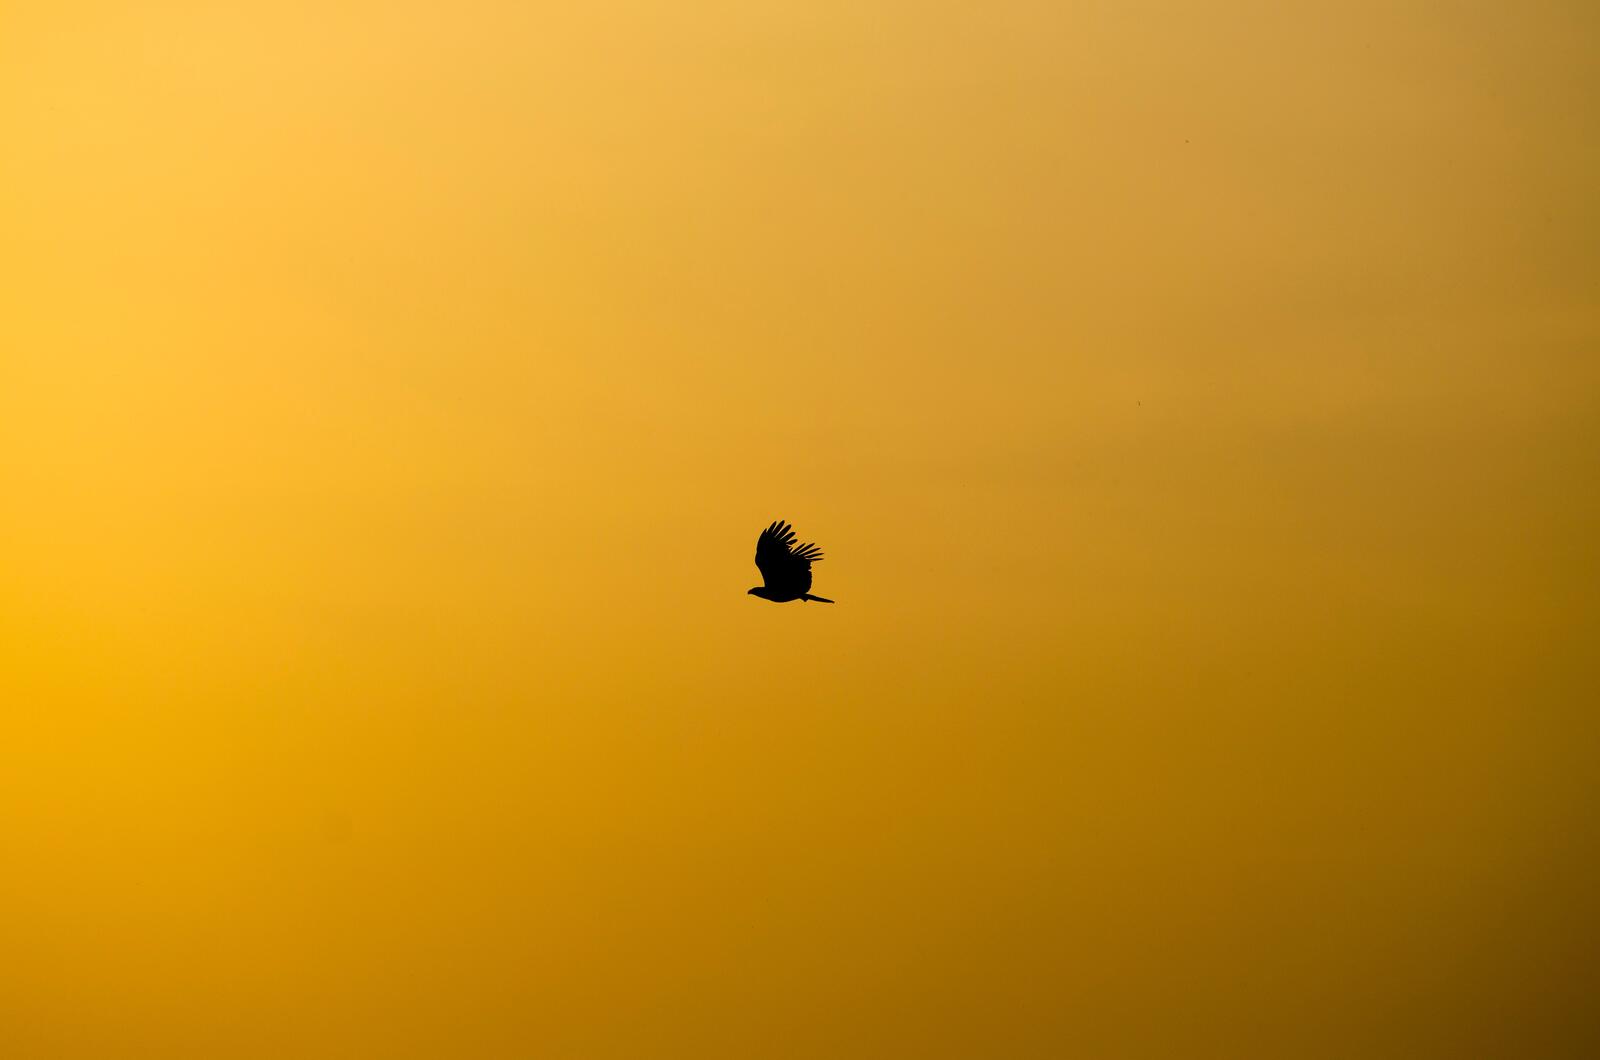 Free photo The silhouette of a flying eagle in an orange sky.